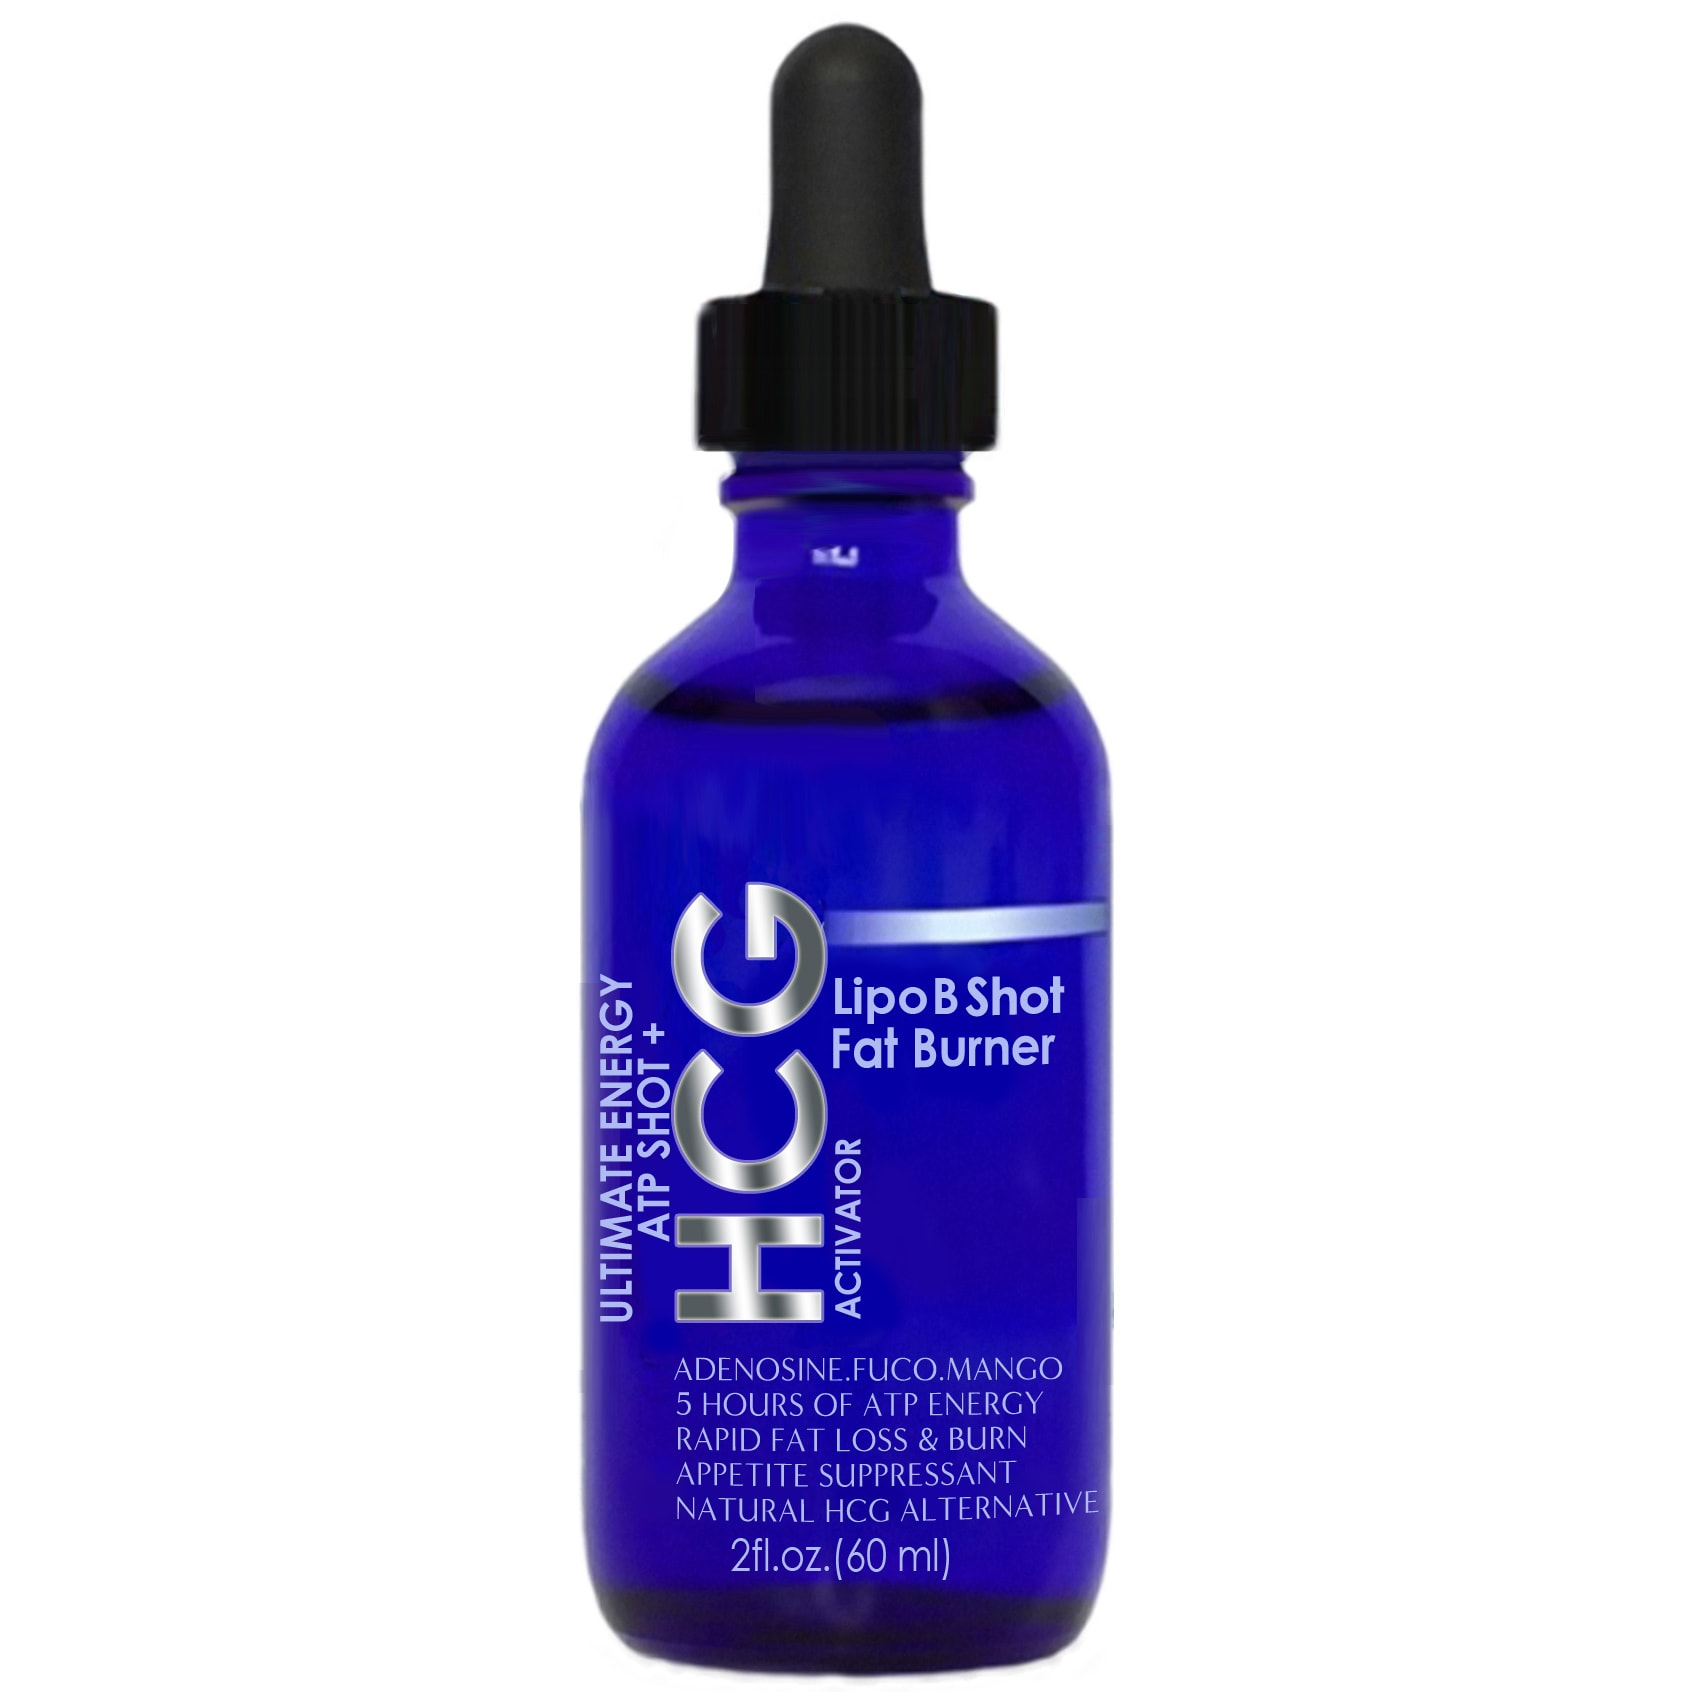 hcg activator review